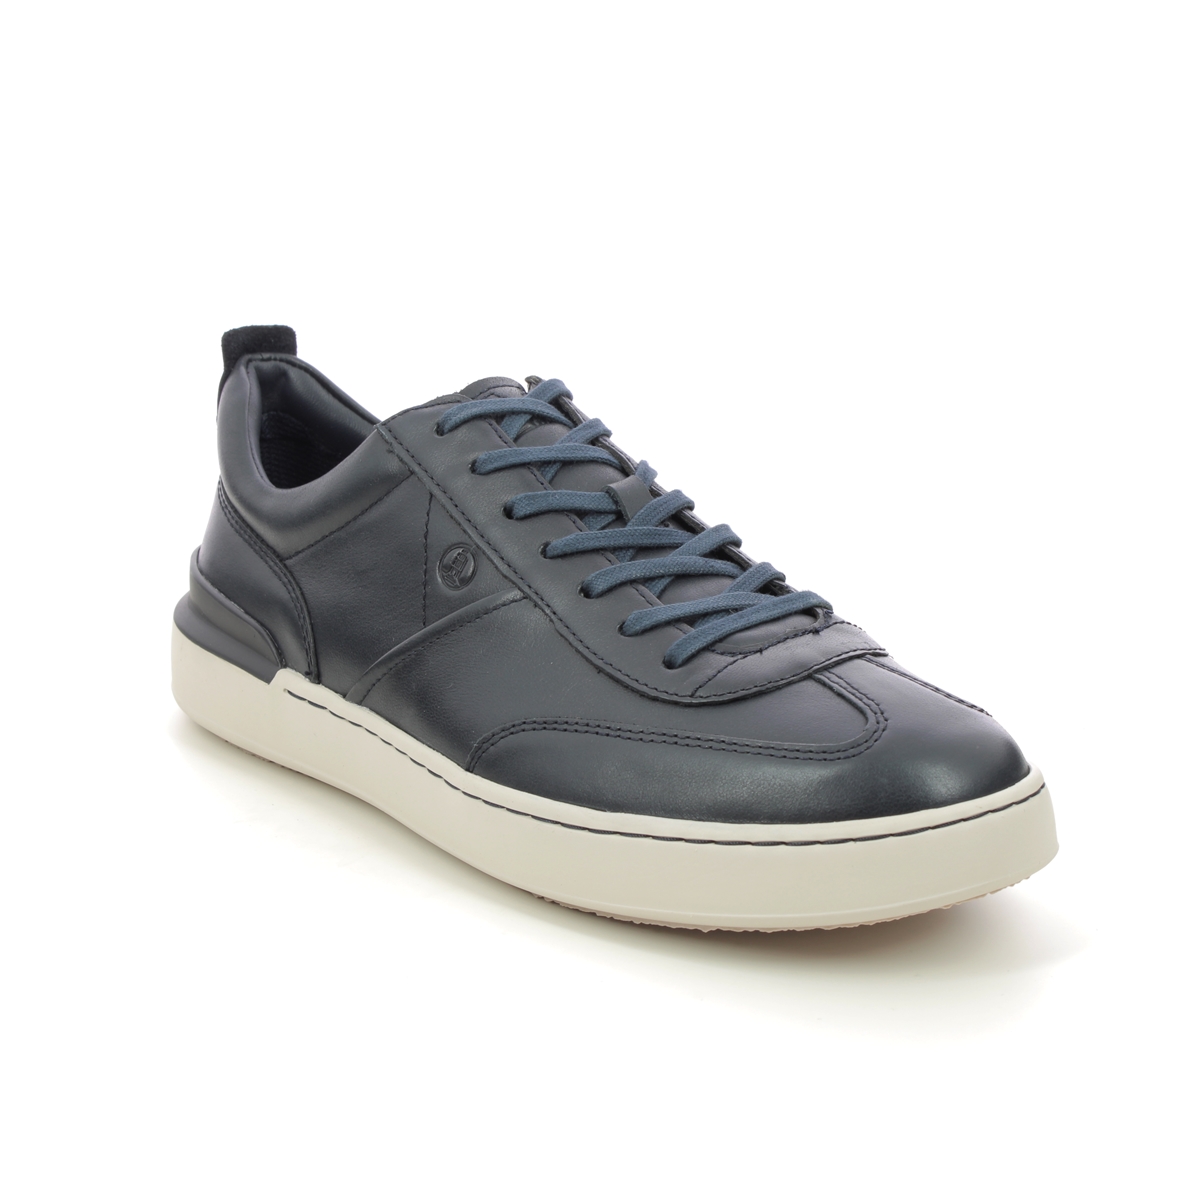 Clarks Courtlite Mode Navy Leather Mens Trainers 734747G In Size 9.5 In Plain Navy Leather G Width Fitting